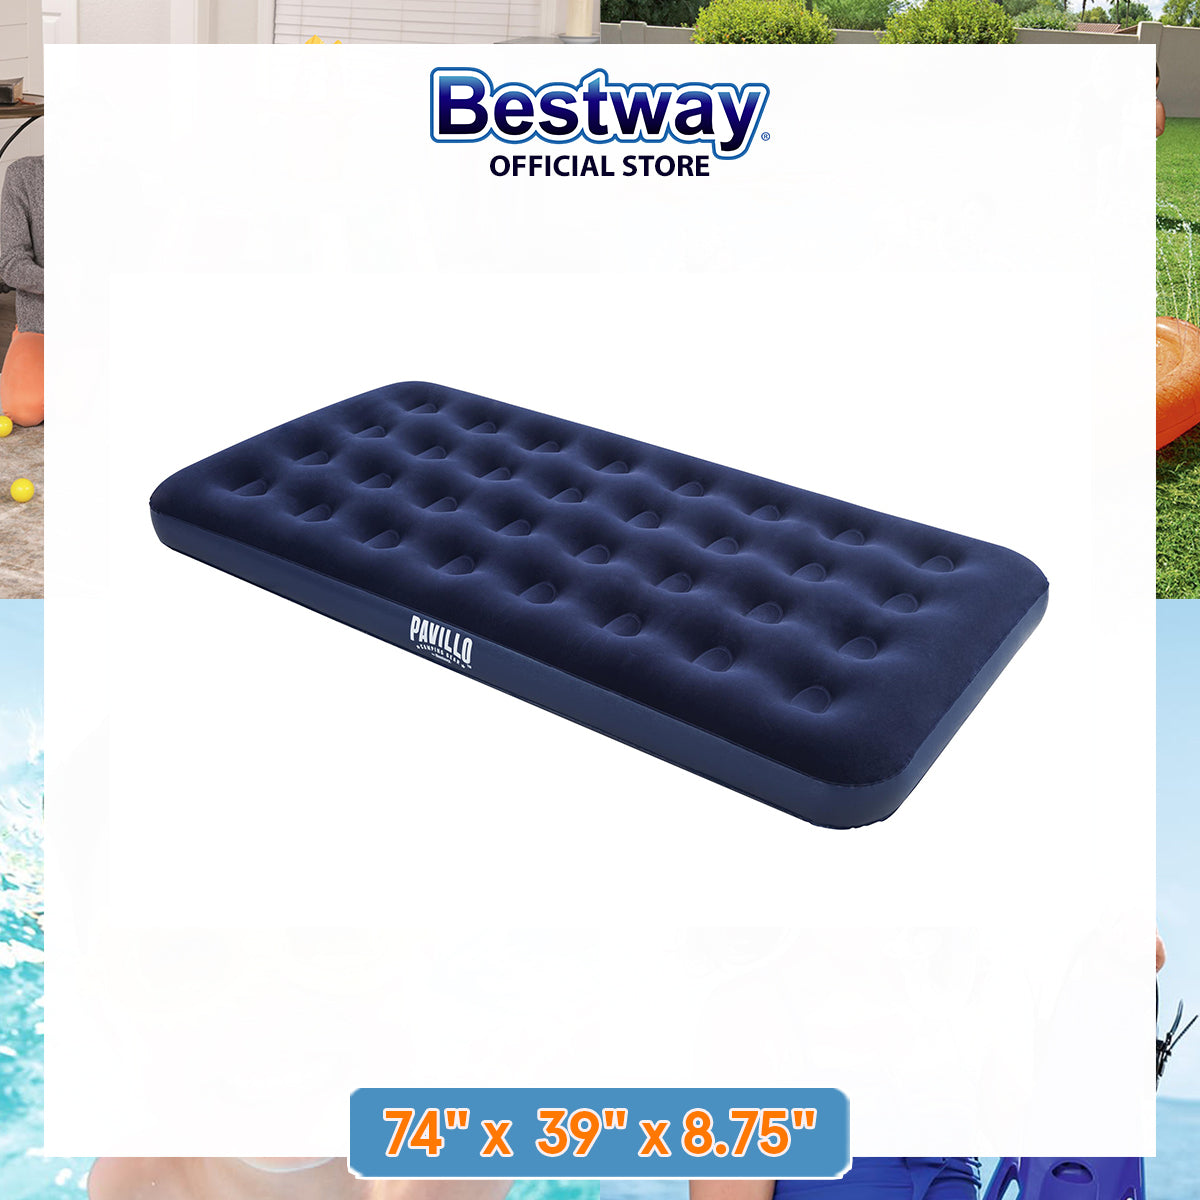 2PCS Bestway Aeroluxe Air Bed (Twin Size; Dark Blue Color)